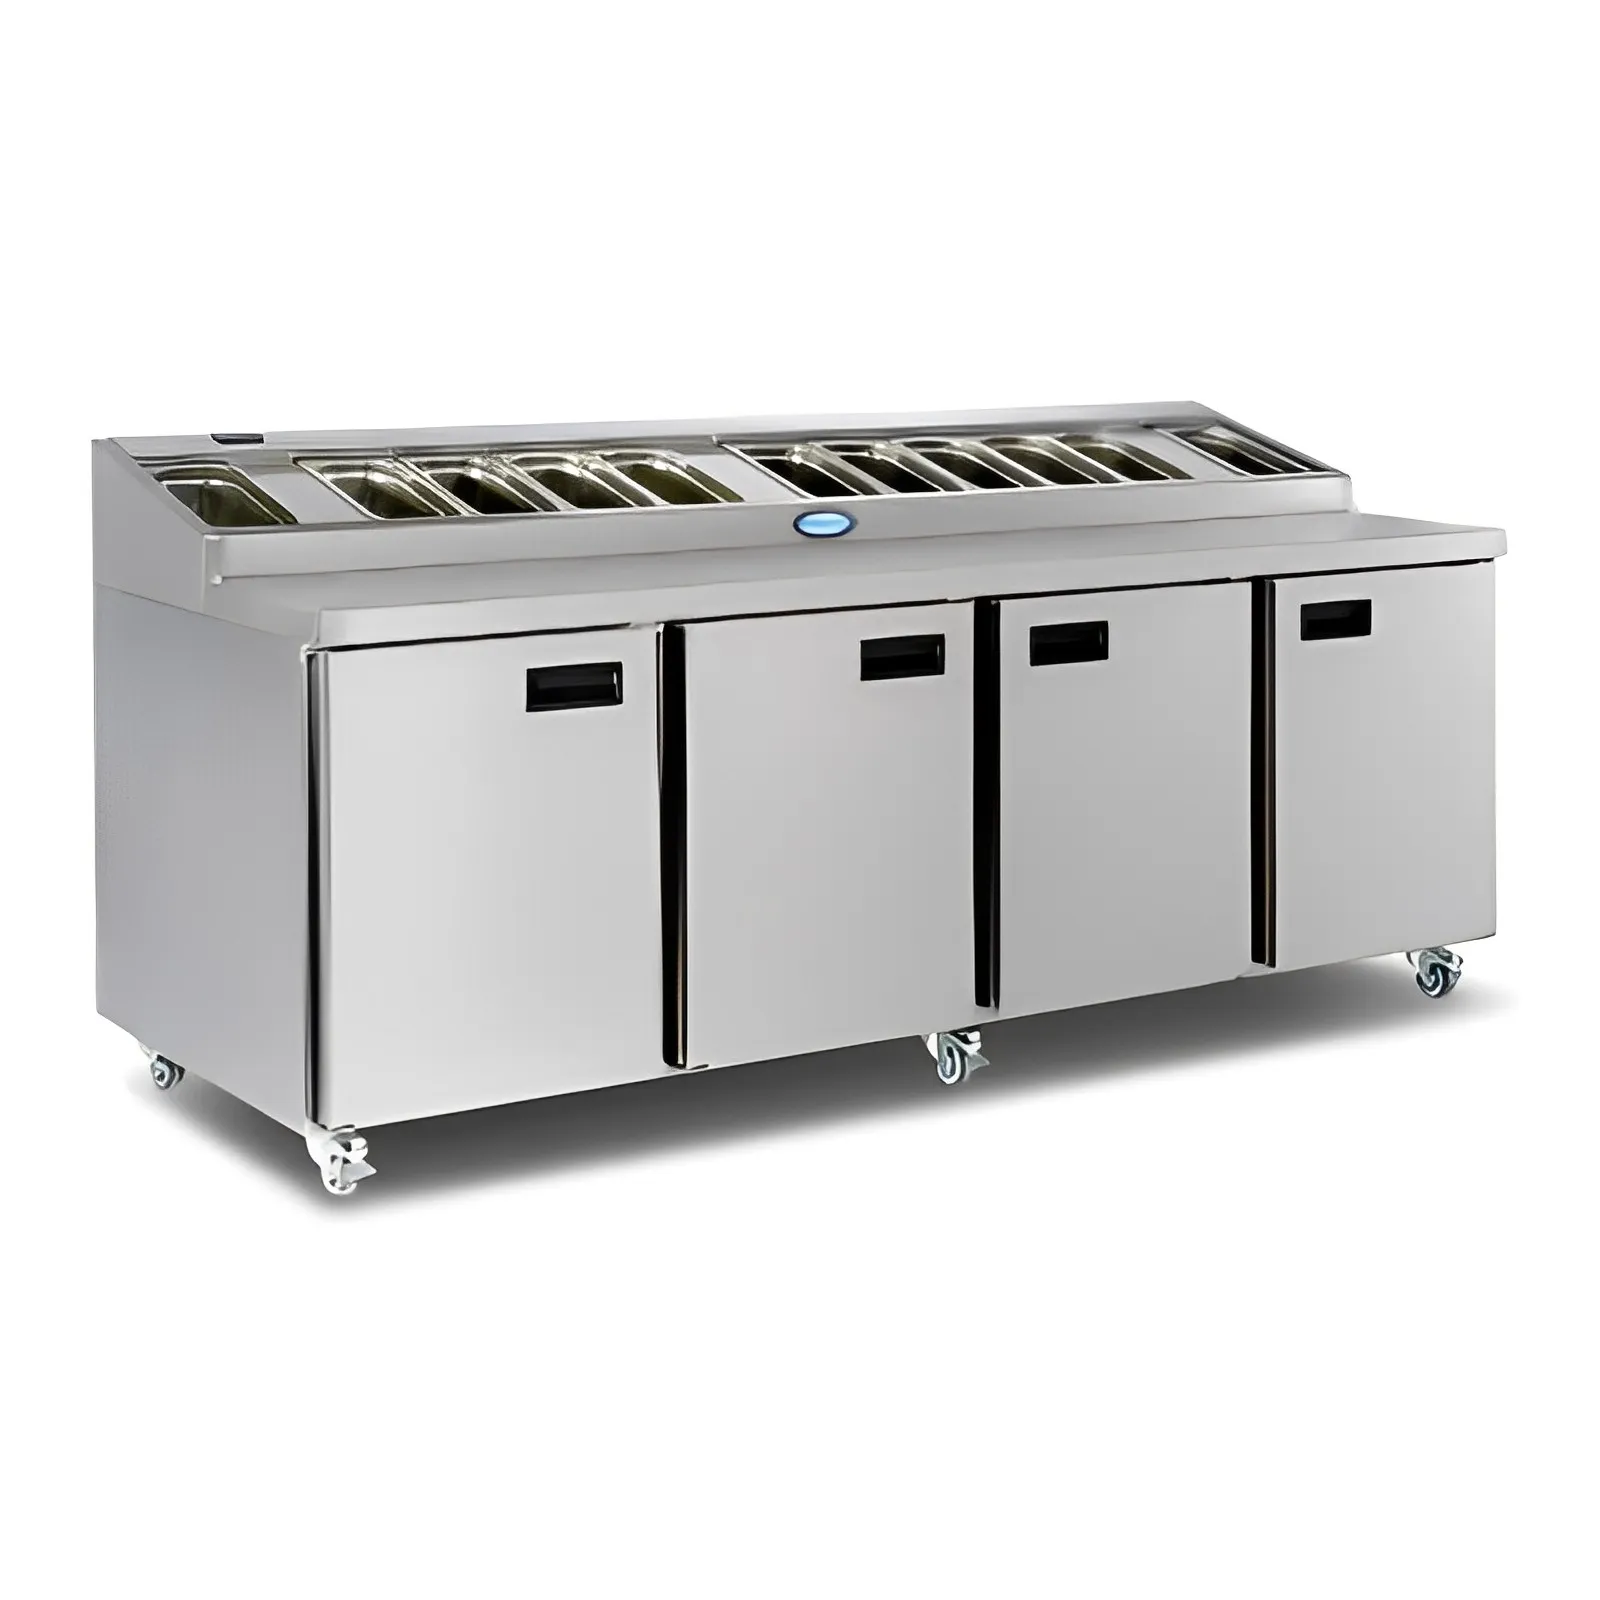 Foster FPS4HR/15-246 Refrigerated Stainless Steel Prep Counter, 570 Litres